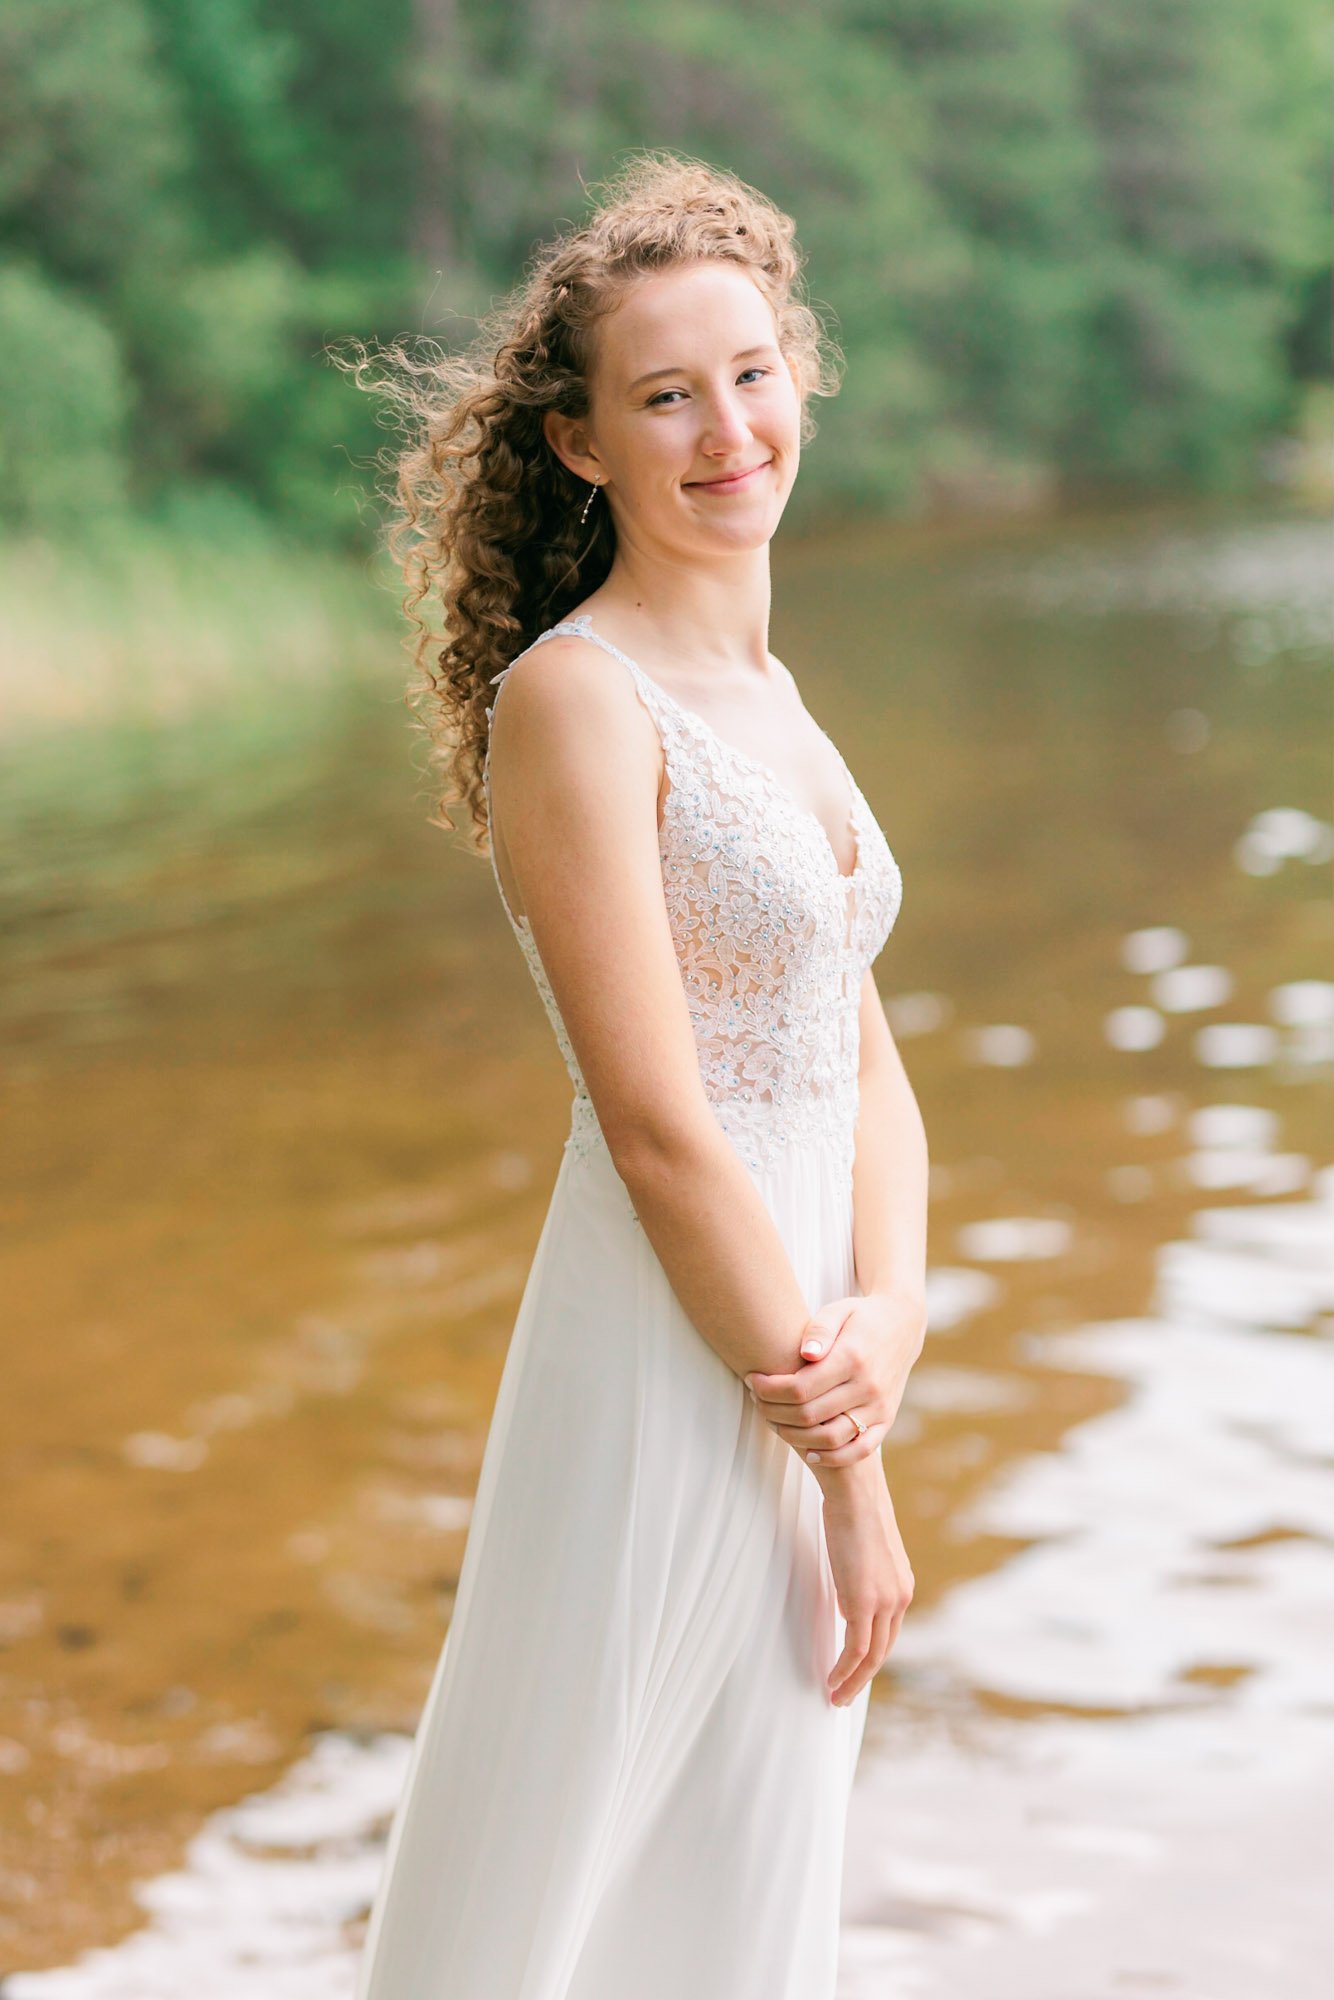 jessica-kovach-photography-lakeside-wisconsin-small-and-intimate-wedding-elopement-with-friends-and-family-233.jpg